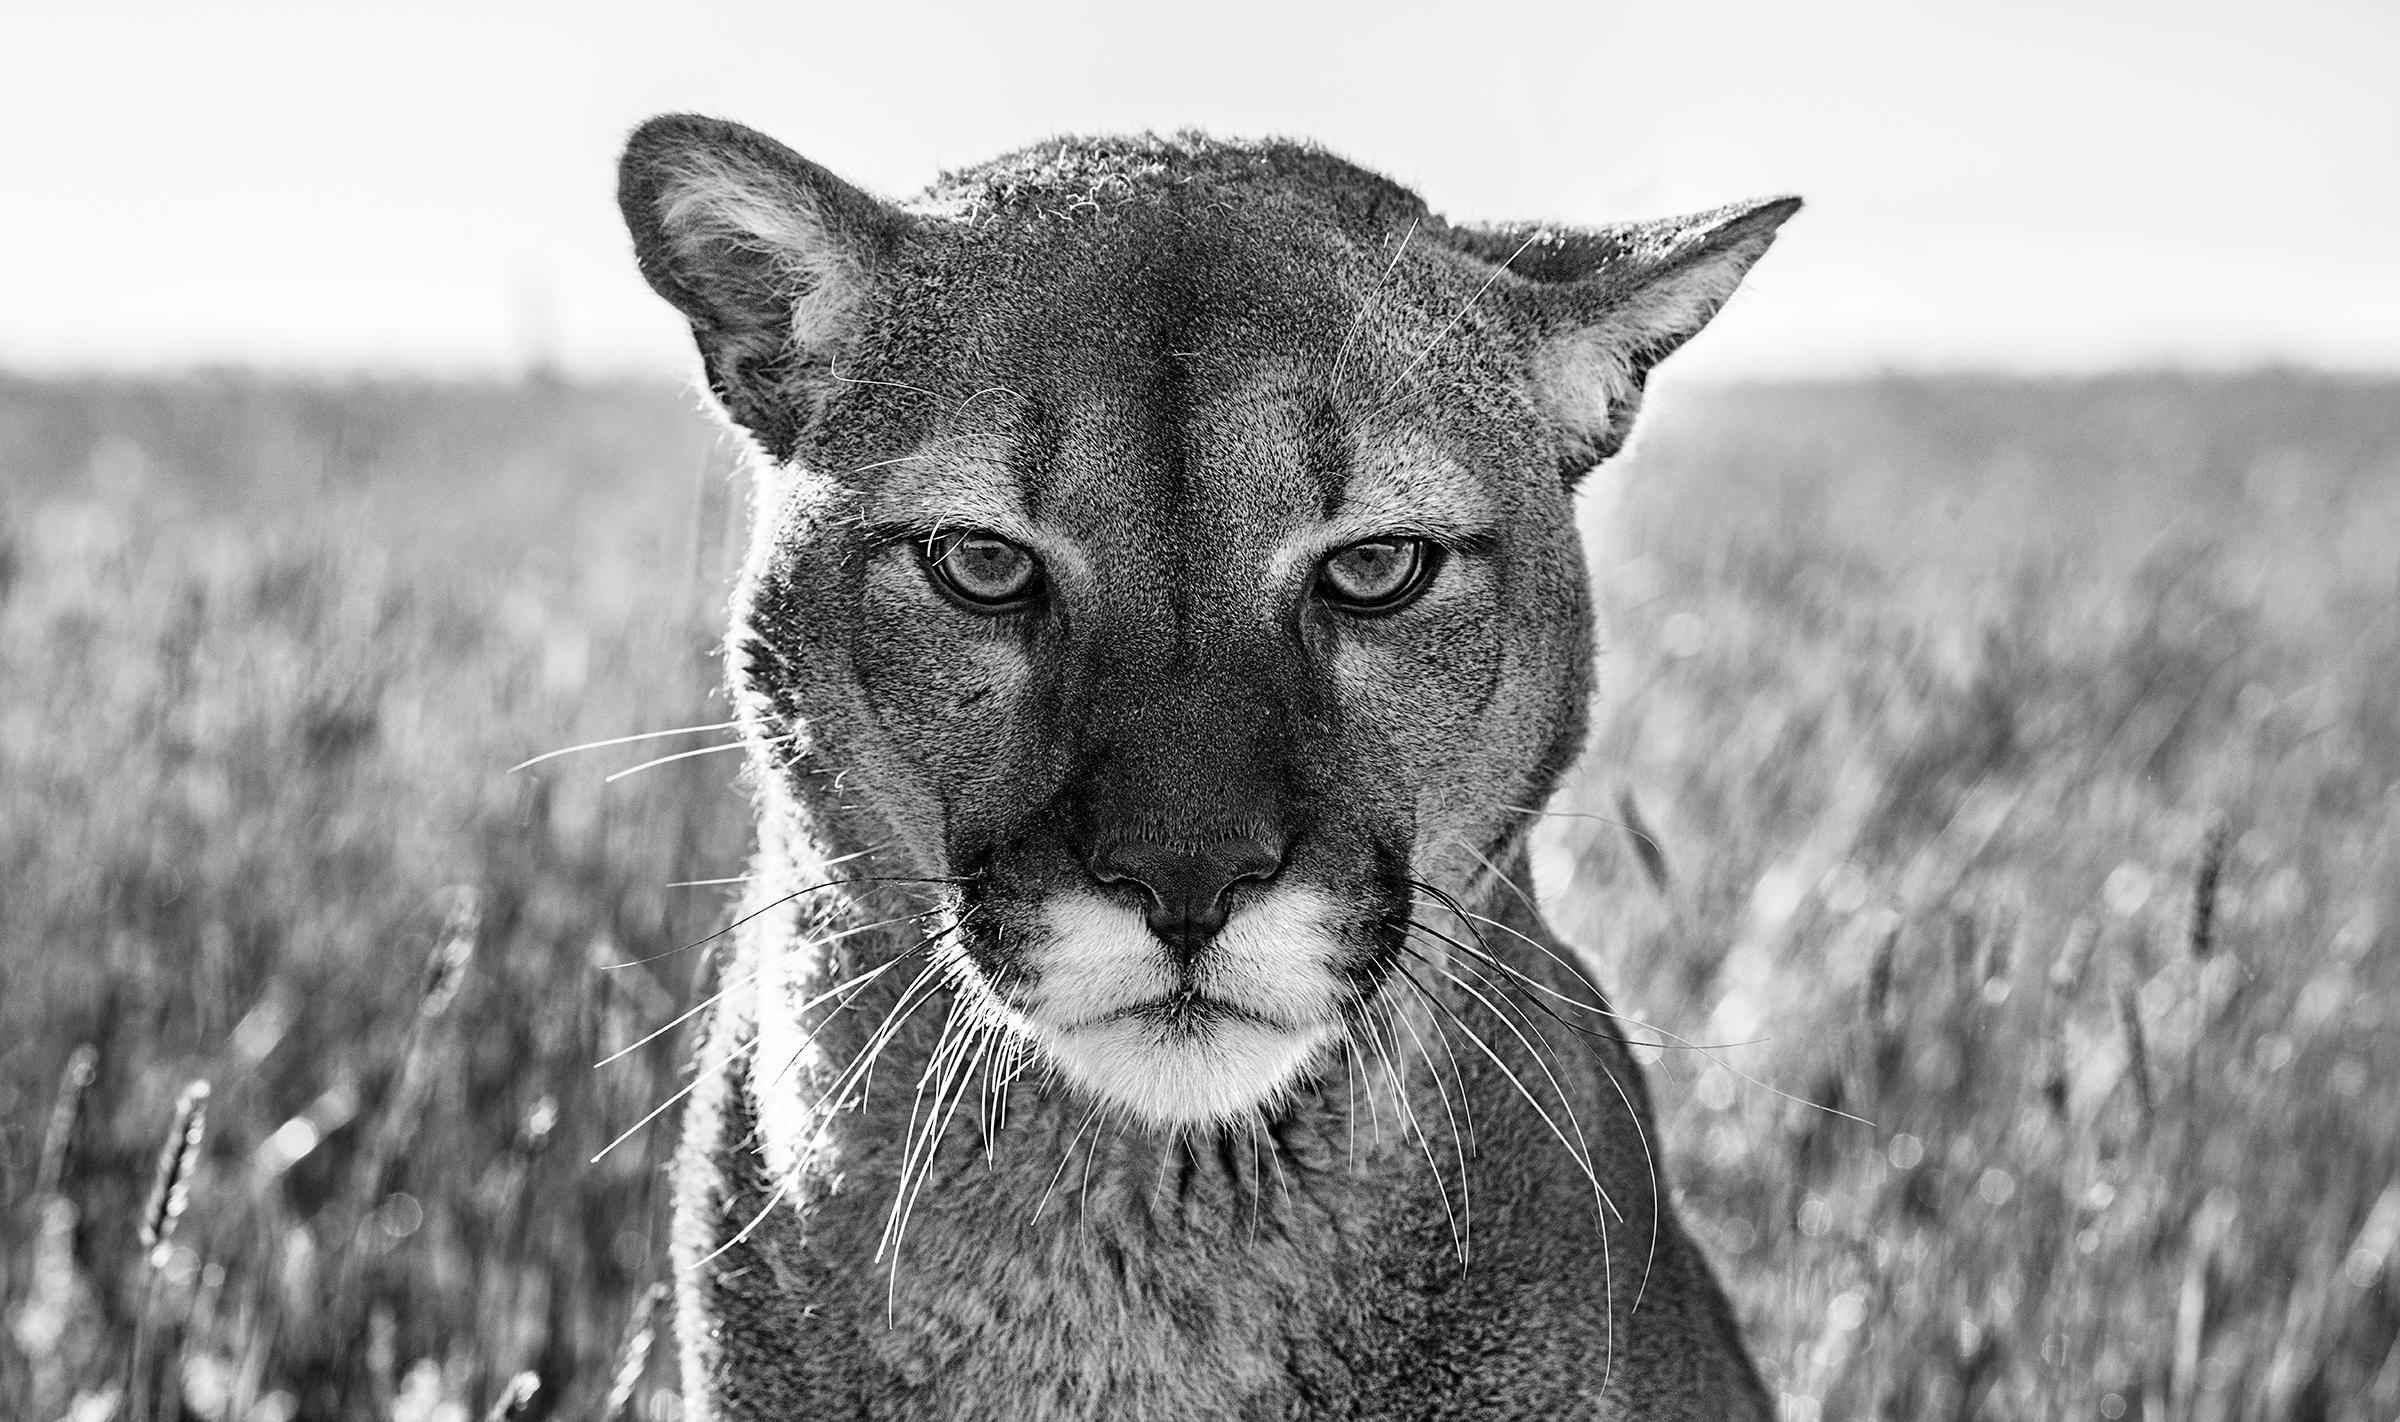 Smokey the Mountain Lion

Montana, USA - 2018

Archival Pigment Print on 315gsm Hahnemühle Photo Rag Baryta Paper
Each is signed, dated and numbered on the front.
Edition Size: 12

Available sizes:

52 x 77 inches  
71 x 110 inches

All prints are